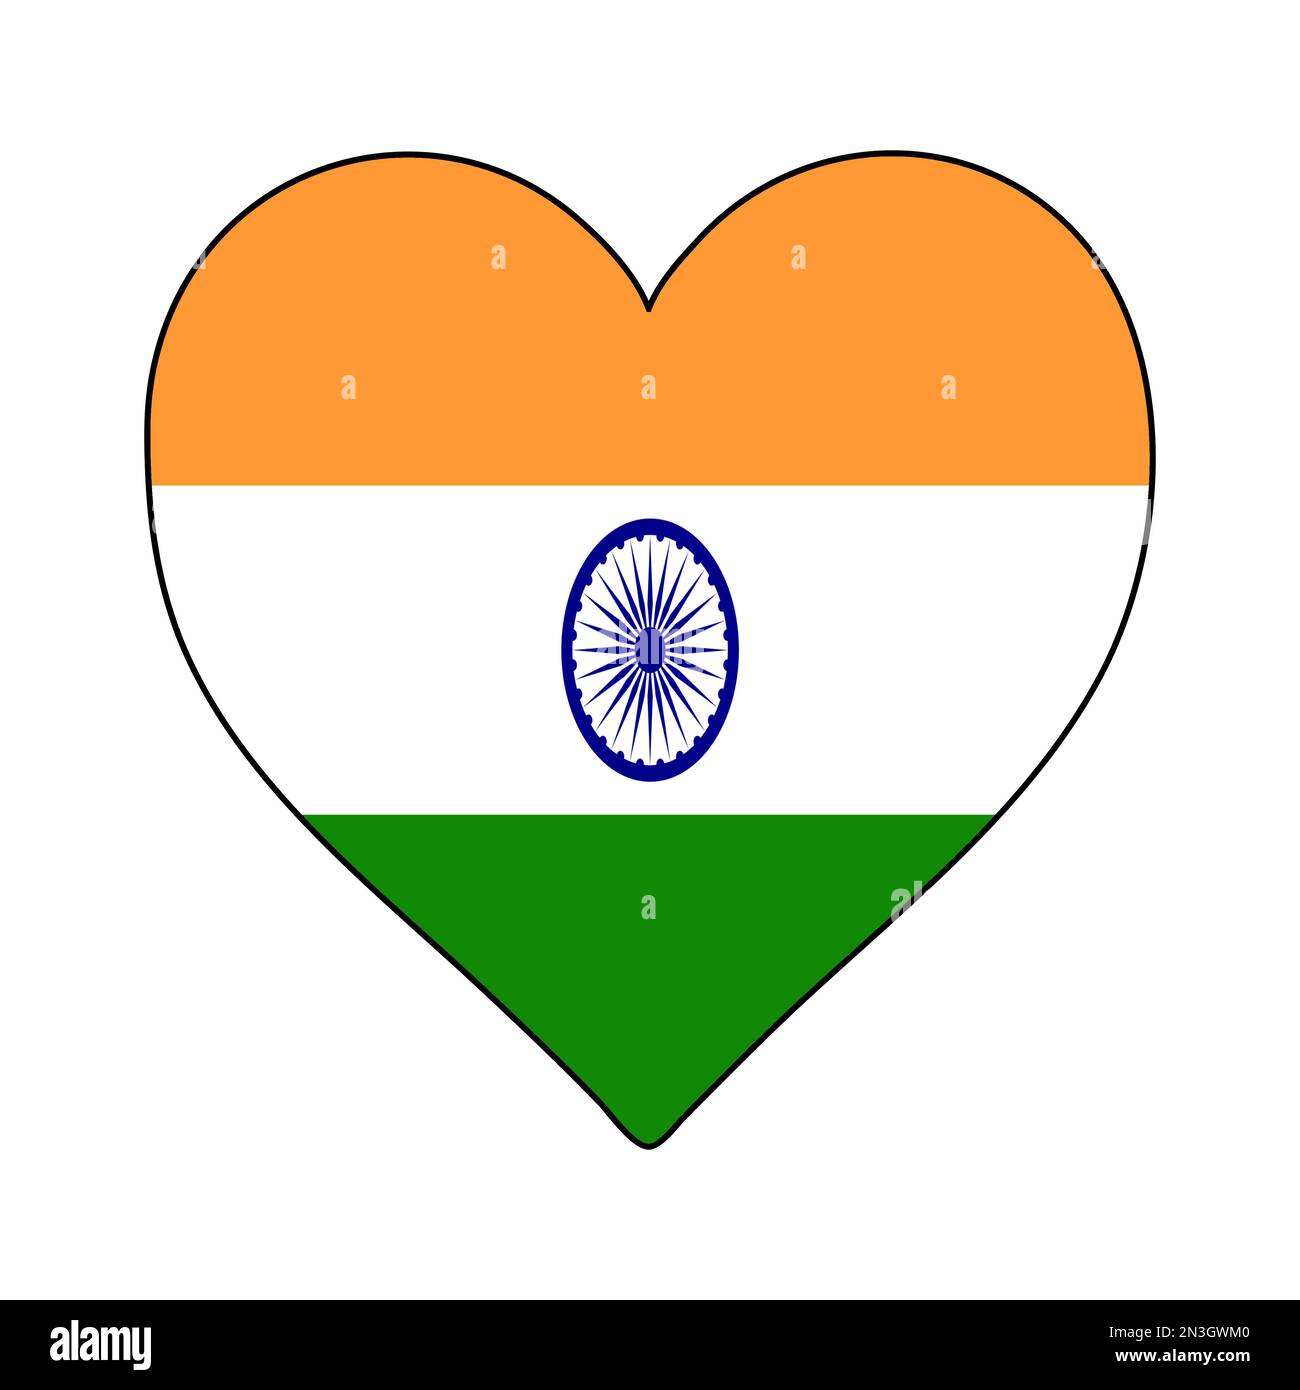 India Heart Shape Flag. Love India. Visit India. South Asia. Asia. Vector Illustration Graphic Design. Stock Vector